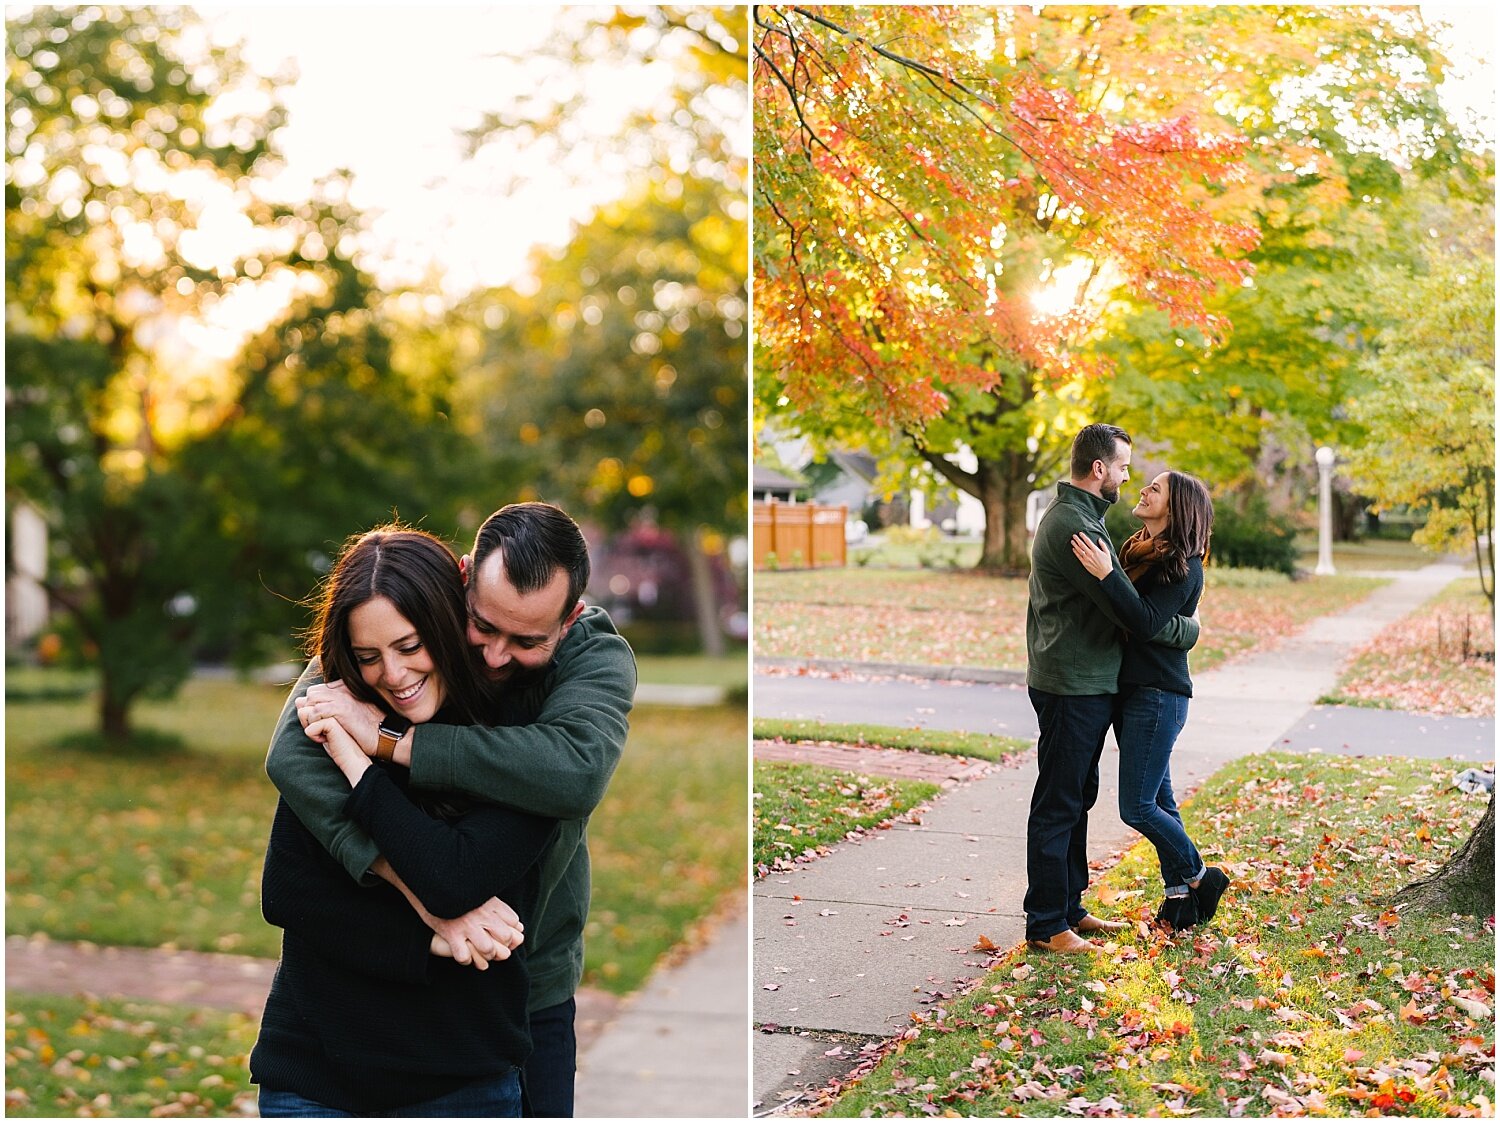 living+roots+wine+engagement+session+rochester+ny+wedding+photographer (27).jpg